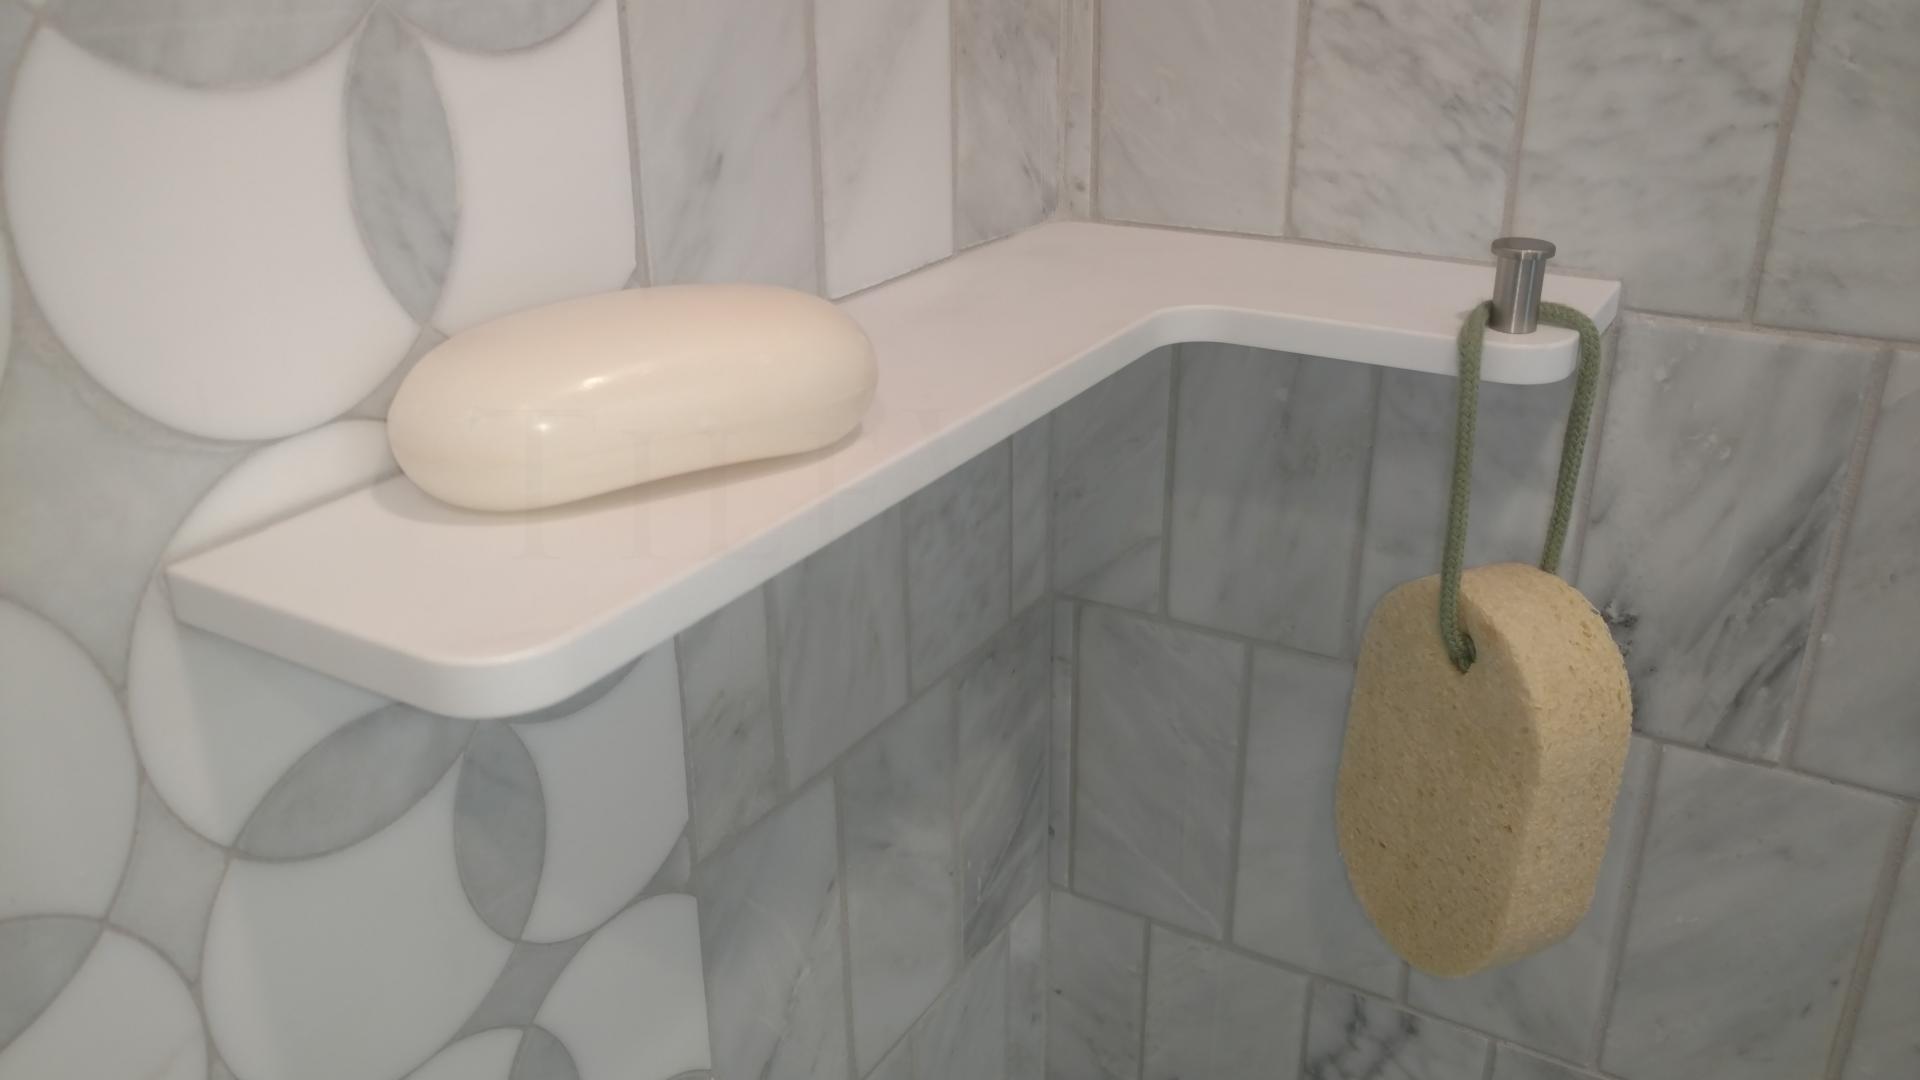 TileWare Products - Install Hooks or Robe Hooks for Tile Showers.  Accessories for Baths and Showers 